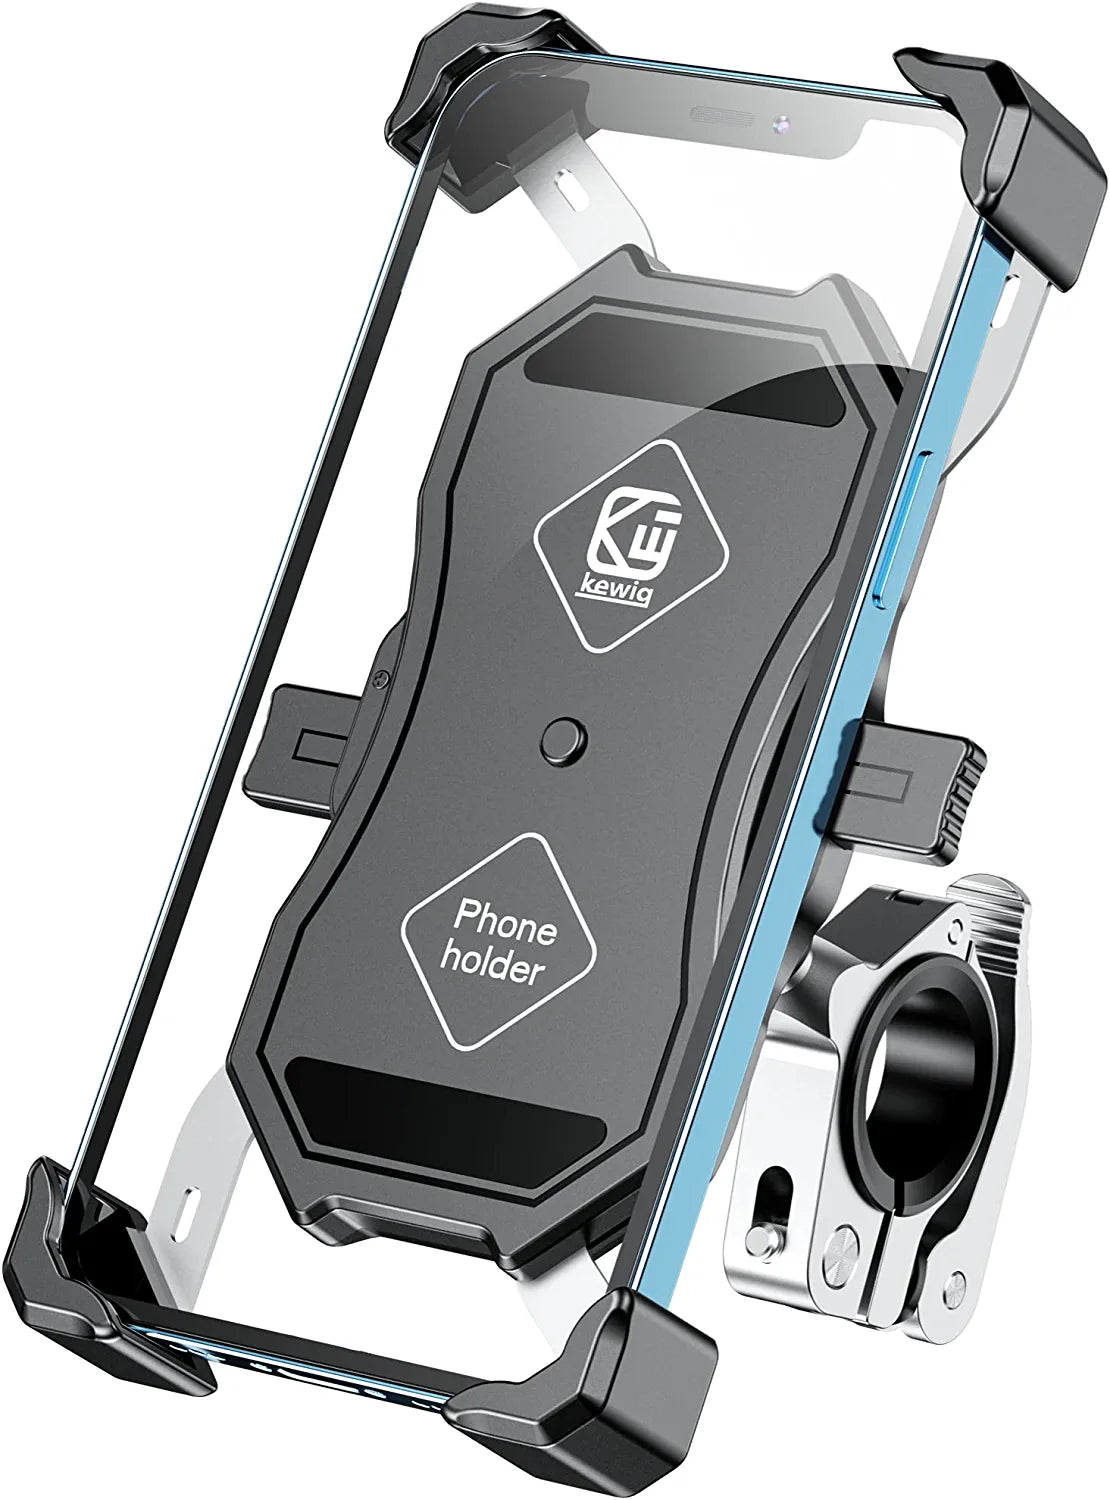 Bike Phone Mount with 360 Degree Rotation & Quick Touch Lock & Release by Happy EBikes